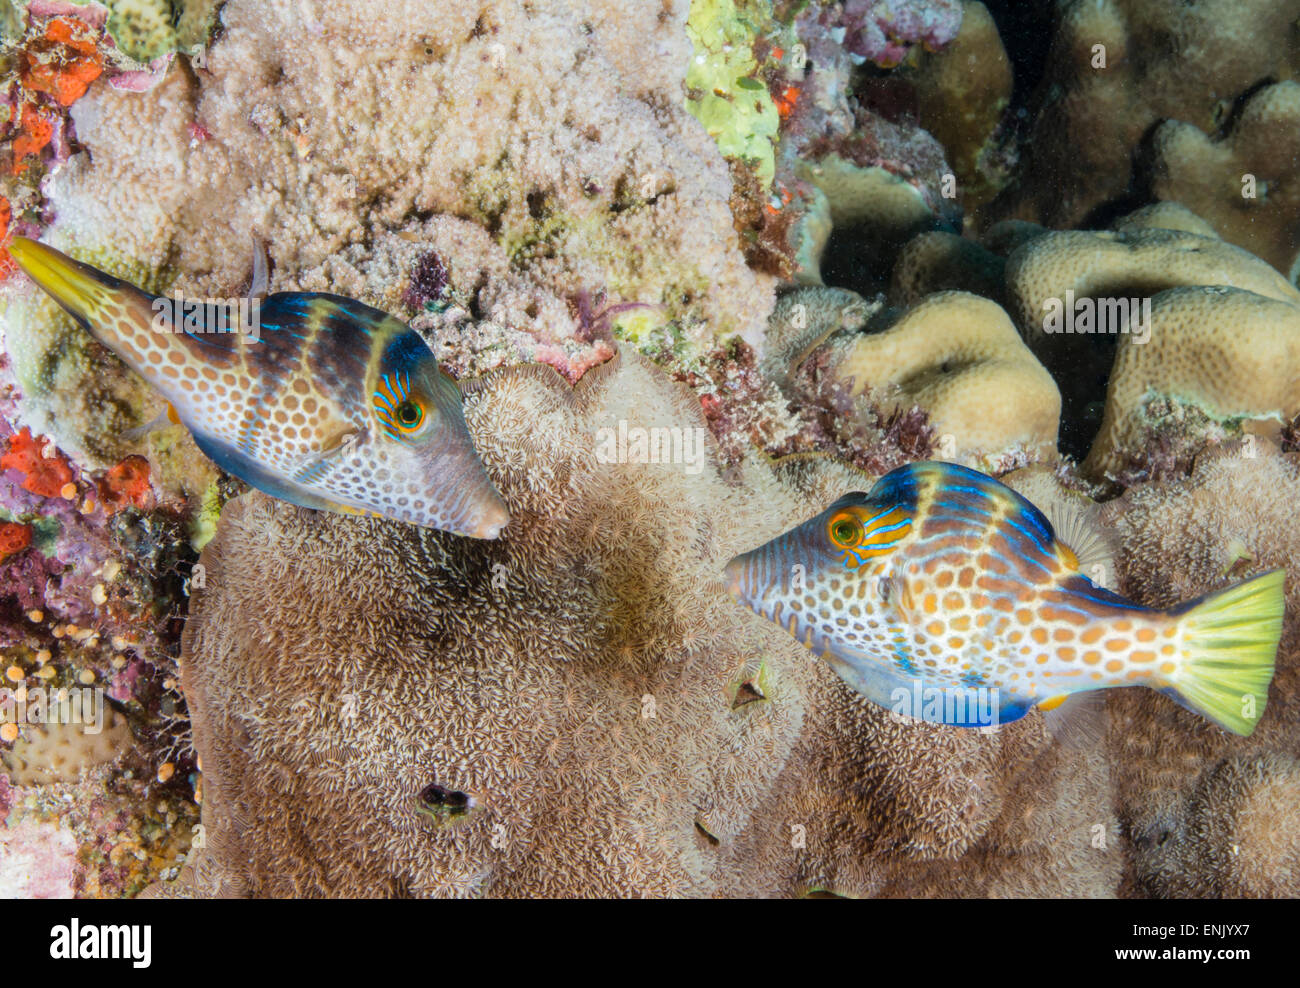 Mating display by pair of Wire-net filefish (Cantherhines paradalis), Queensland, Australia, Pacific Stock Photo